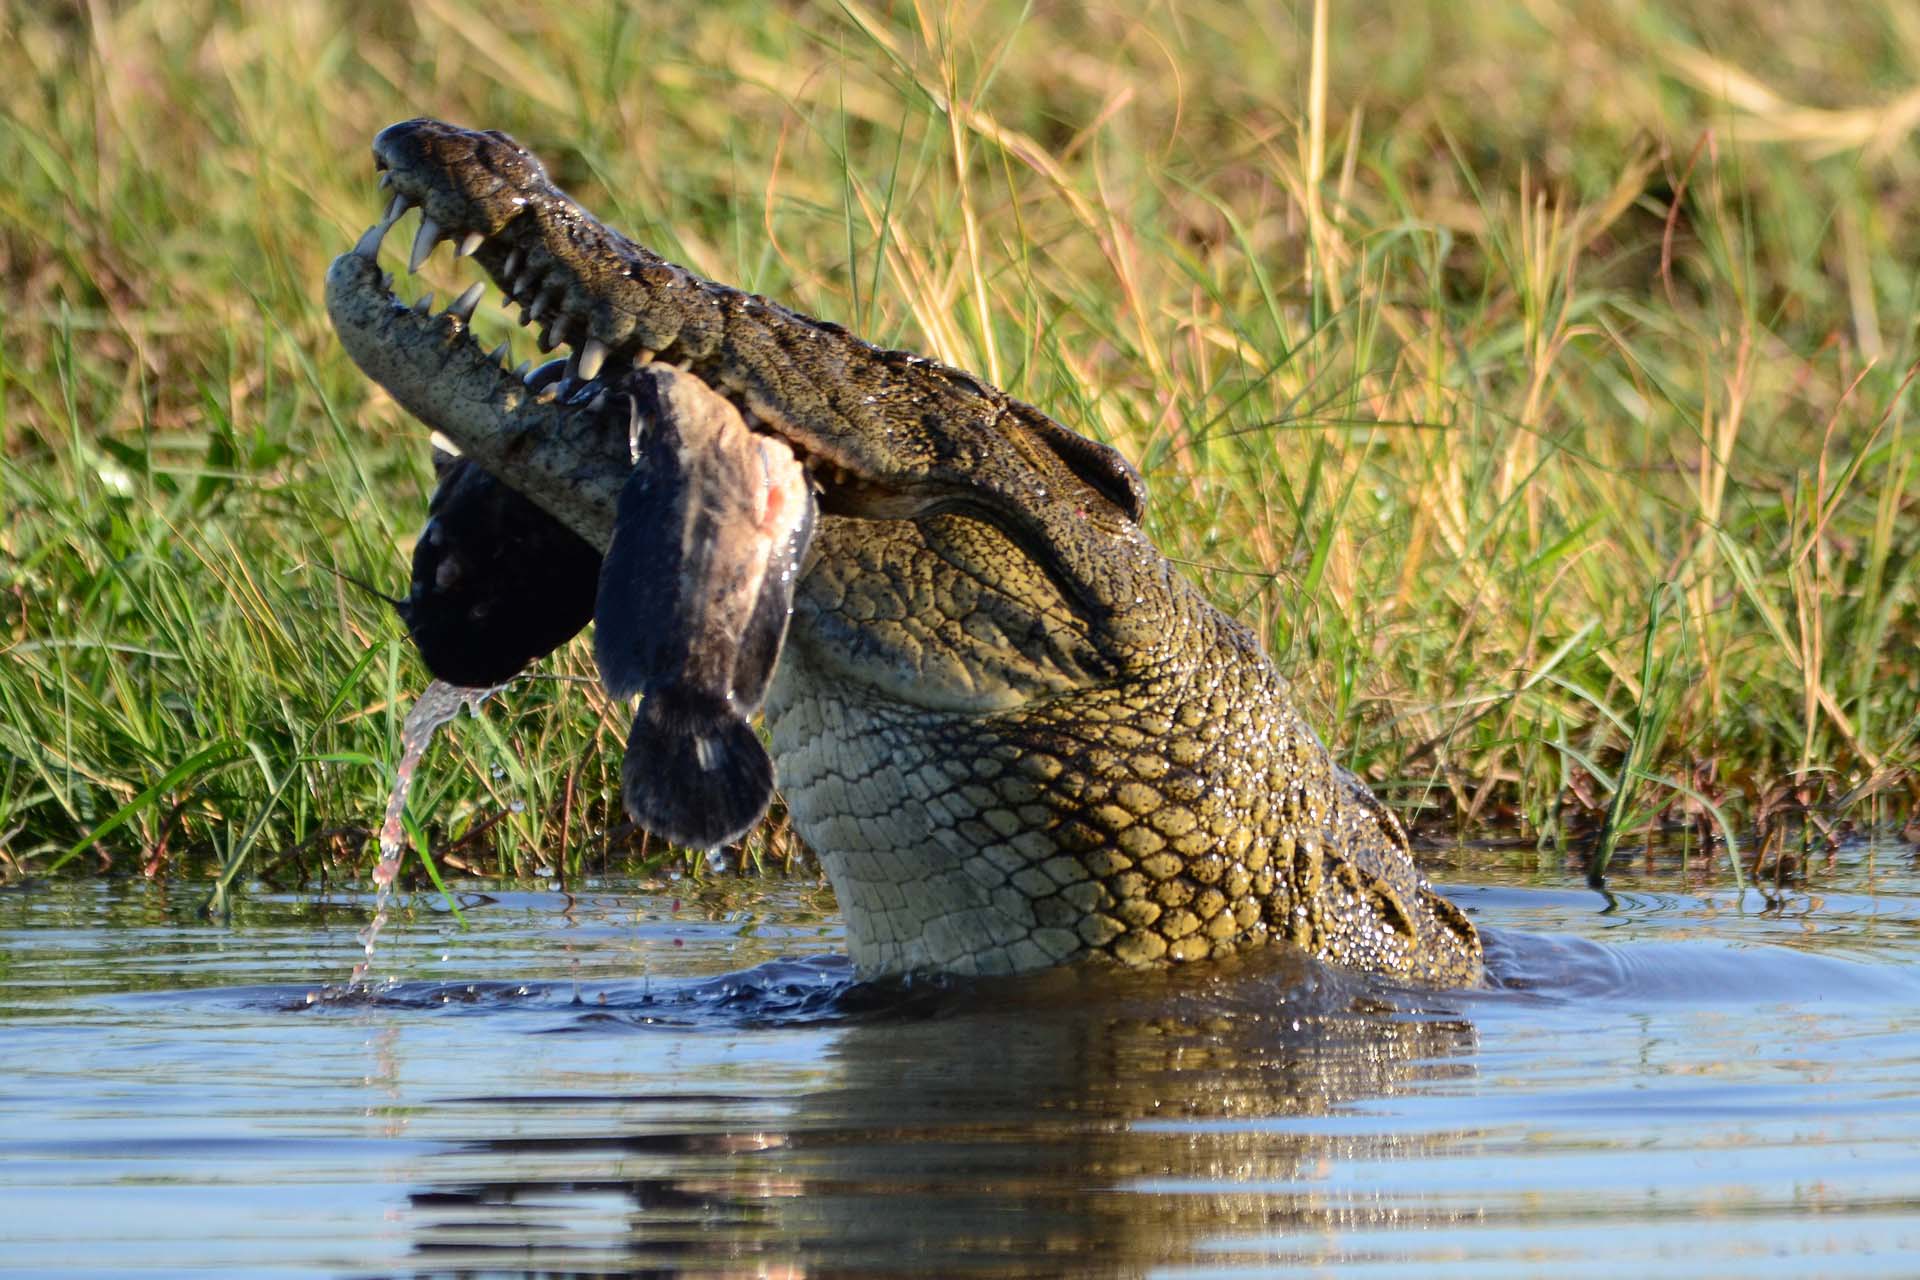 Crocodile in Chobe River with a fish in his mouth